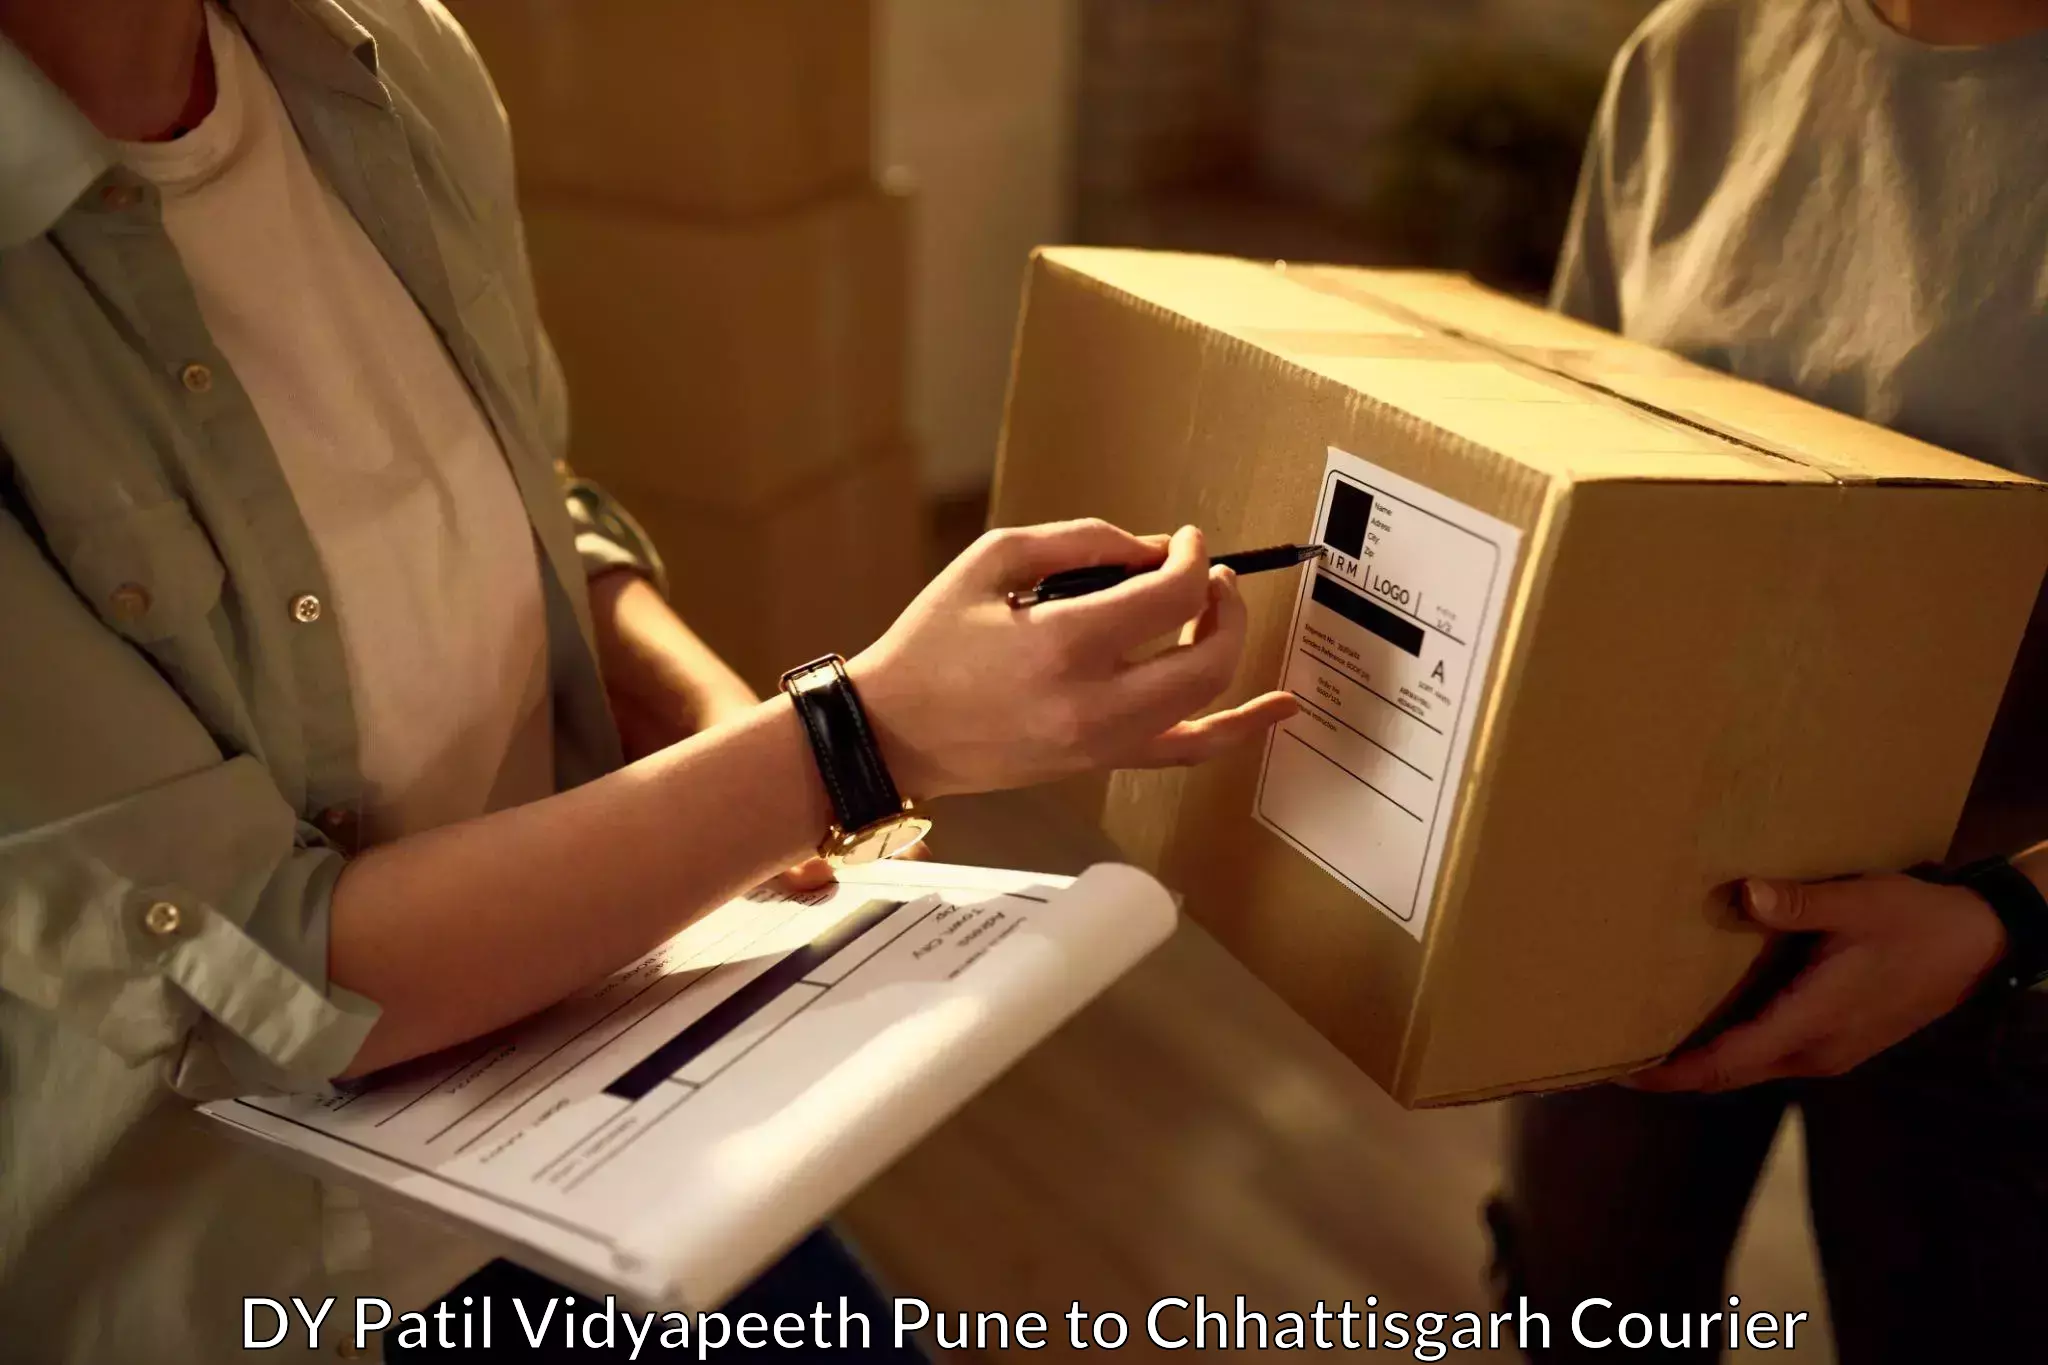 24-hour delivery options DY Patil Vidyapeeth Pune to Kondagaon